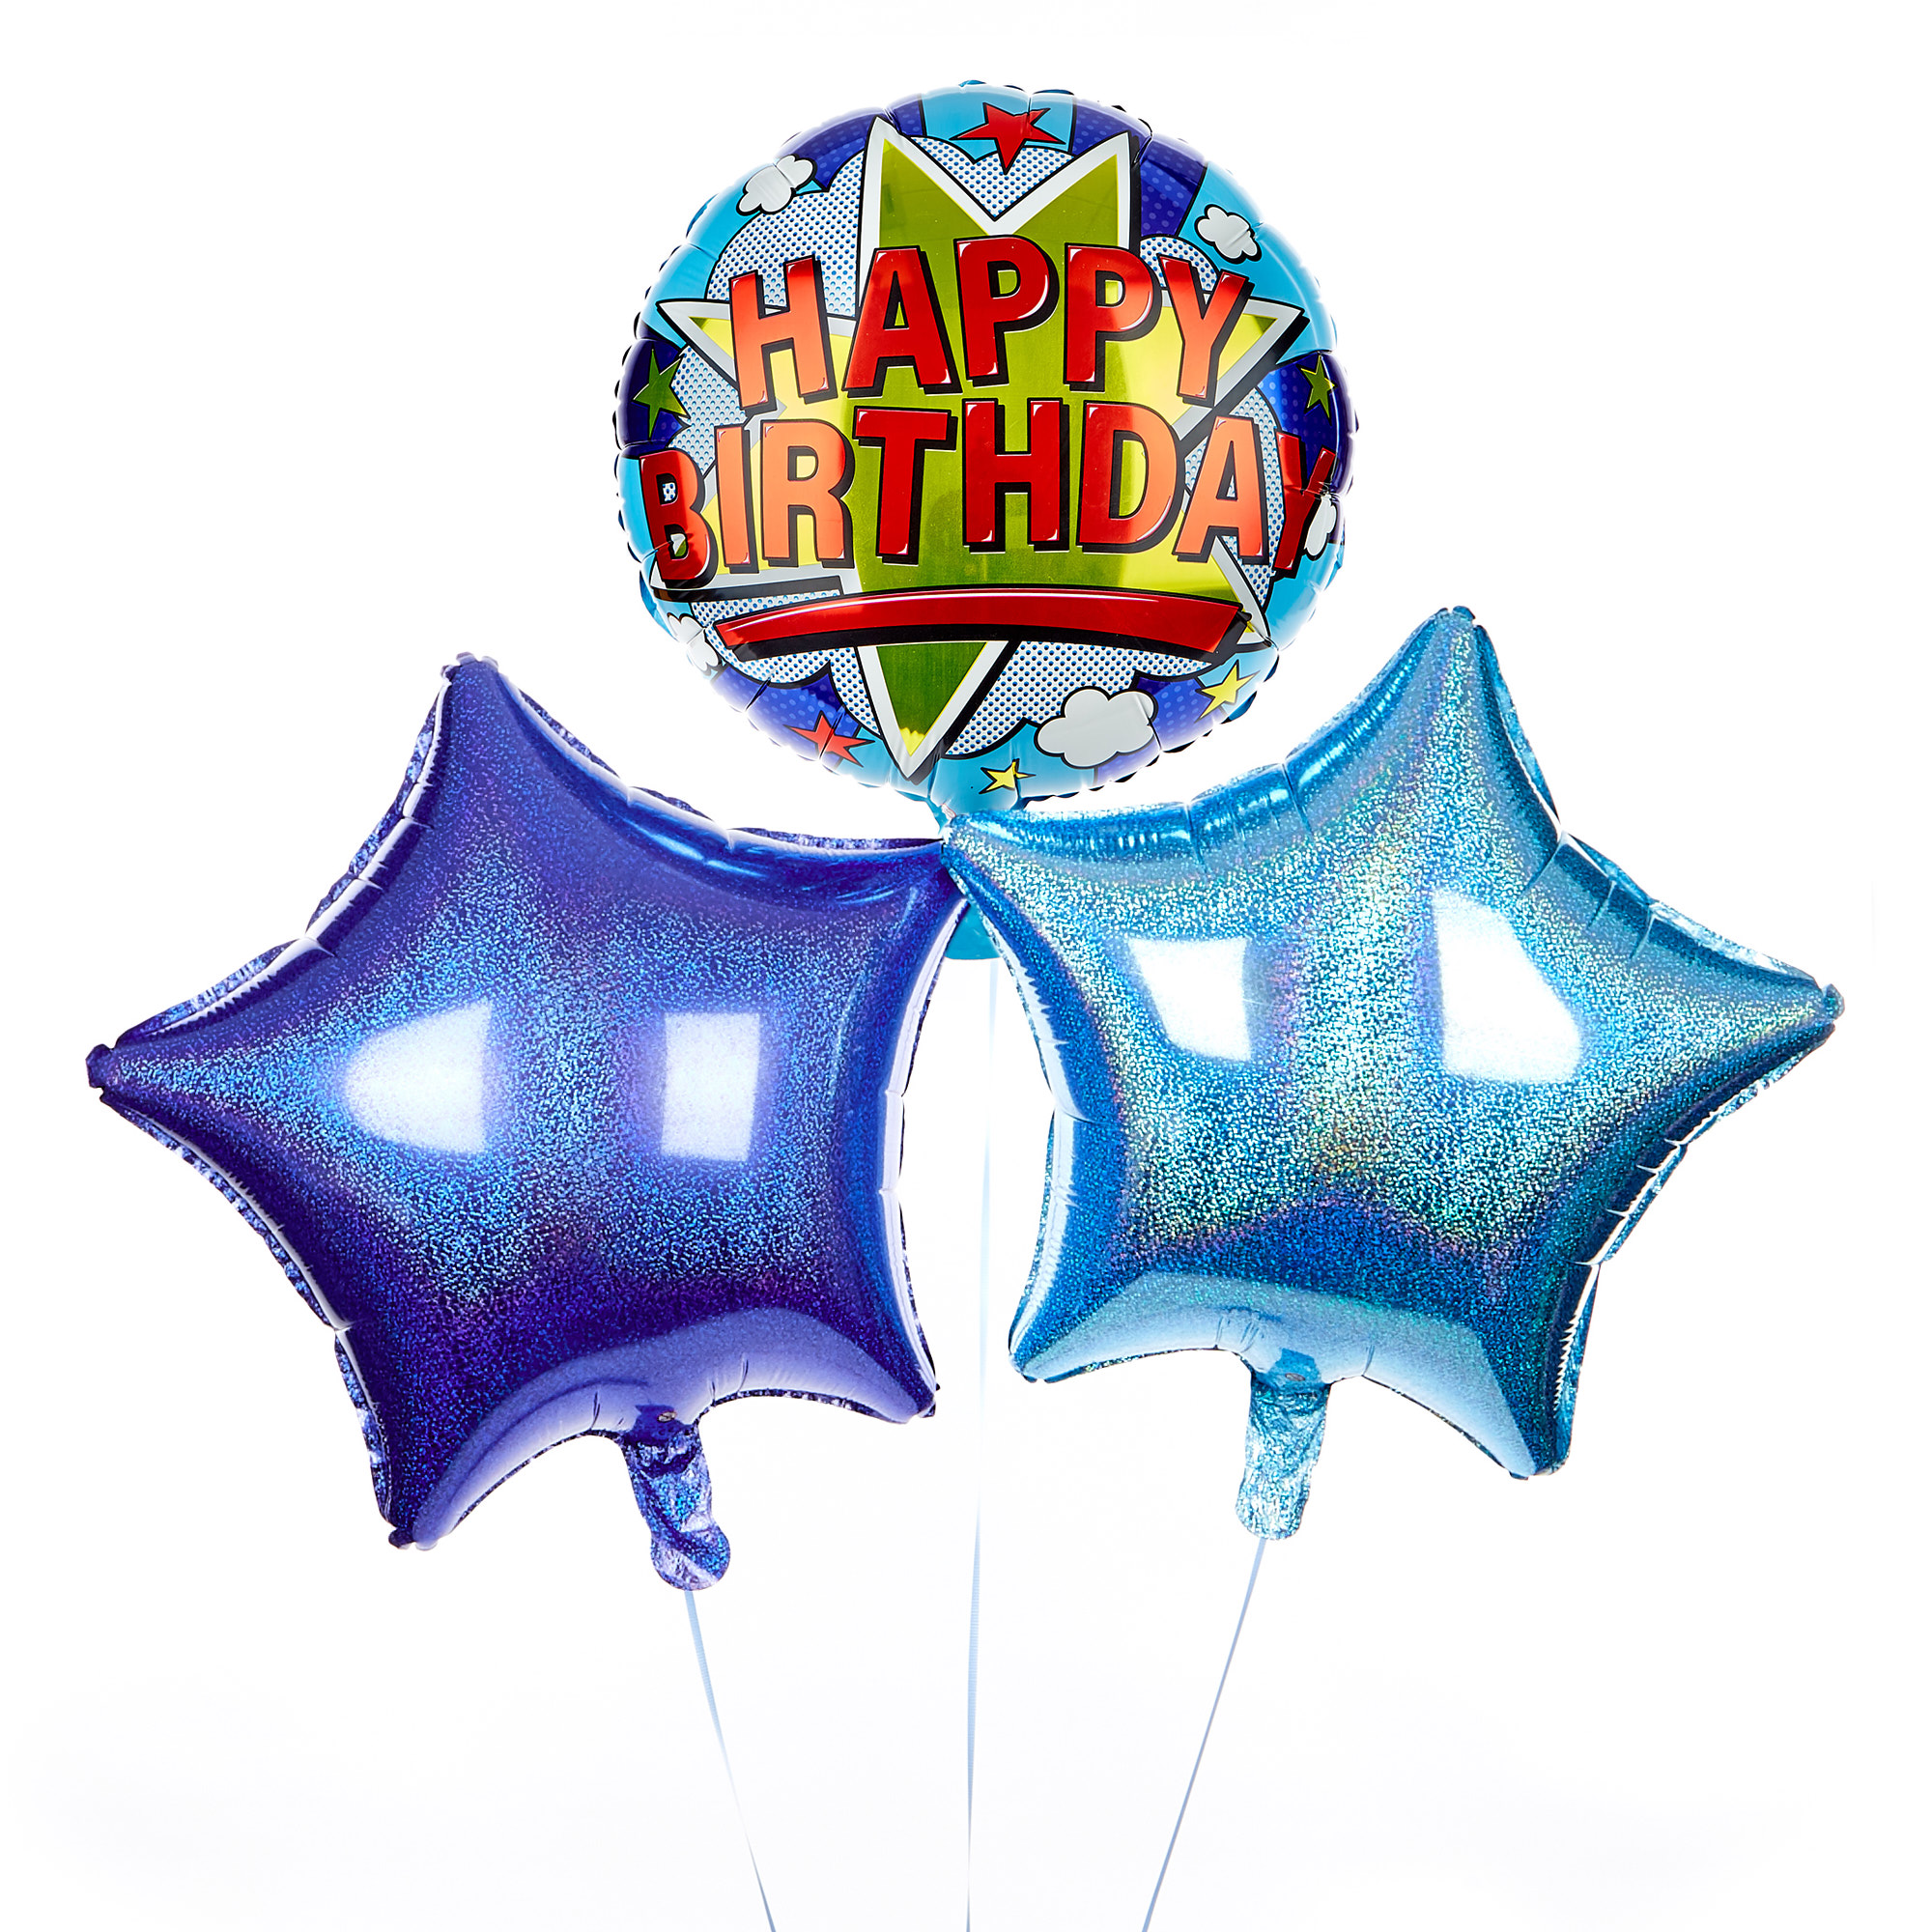 Pop Art Happy Birthday Balloon Bouquet - DELIVERED INFLATED!